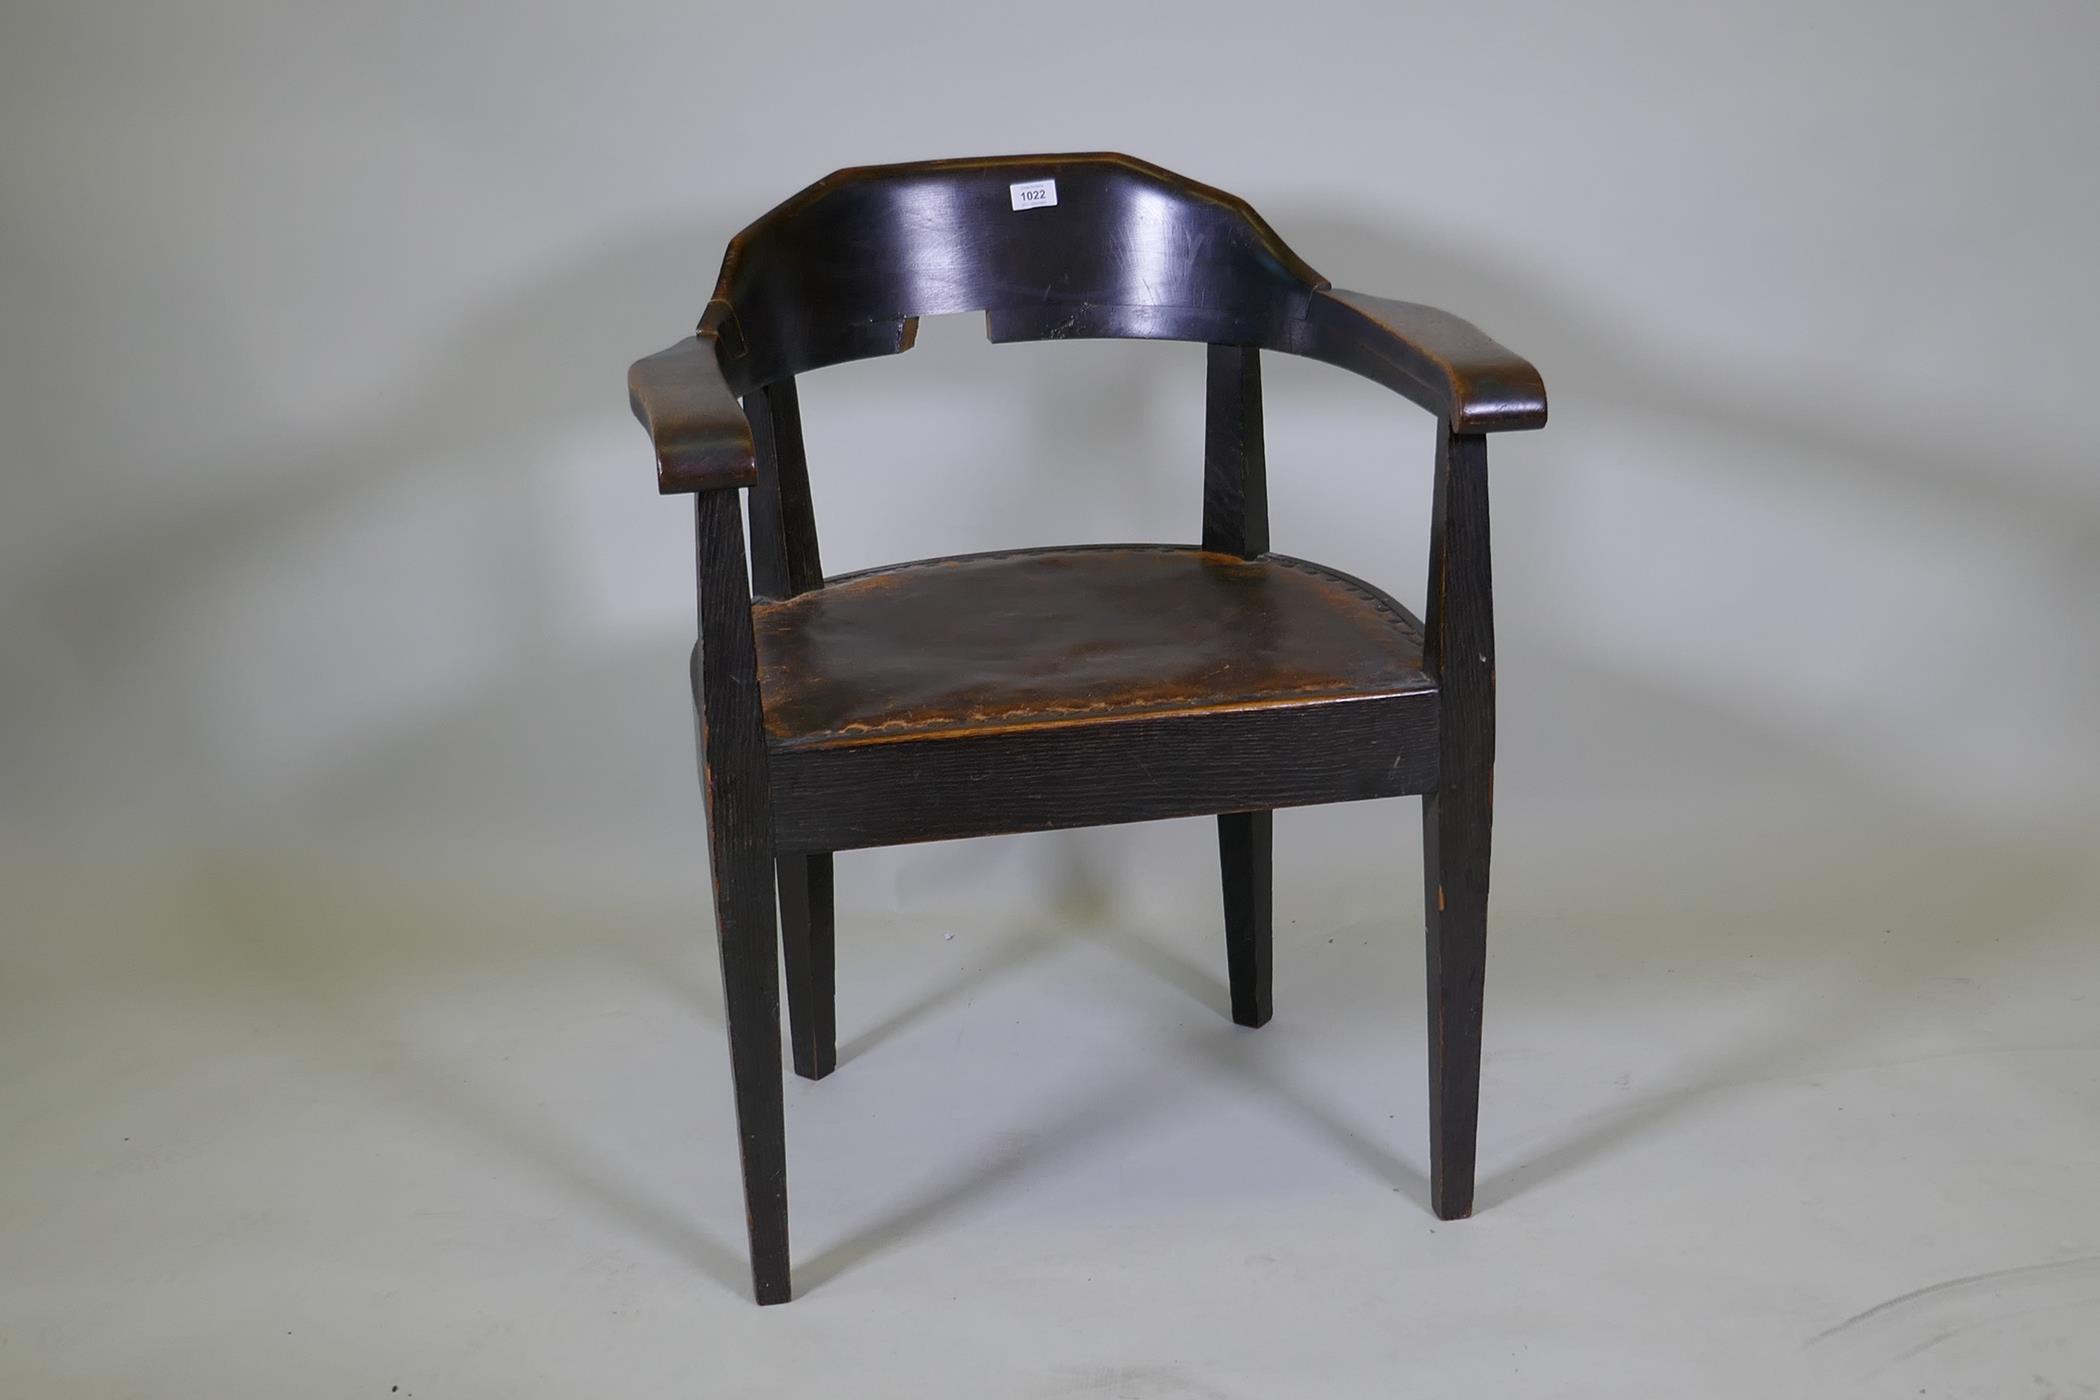 A late C19th/early C20th German oak tub chair with leather studded seat